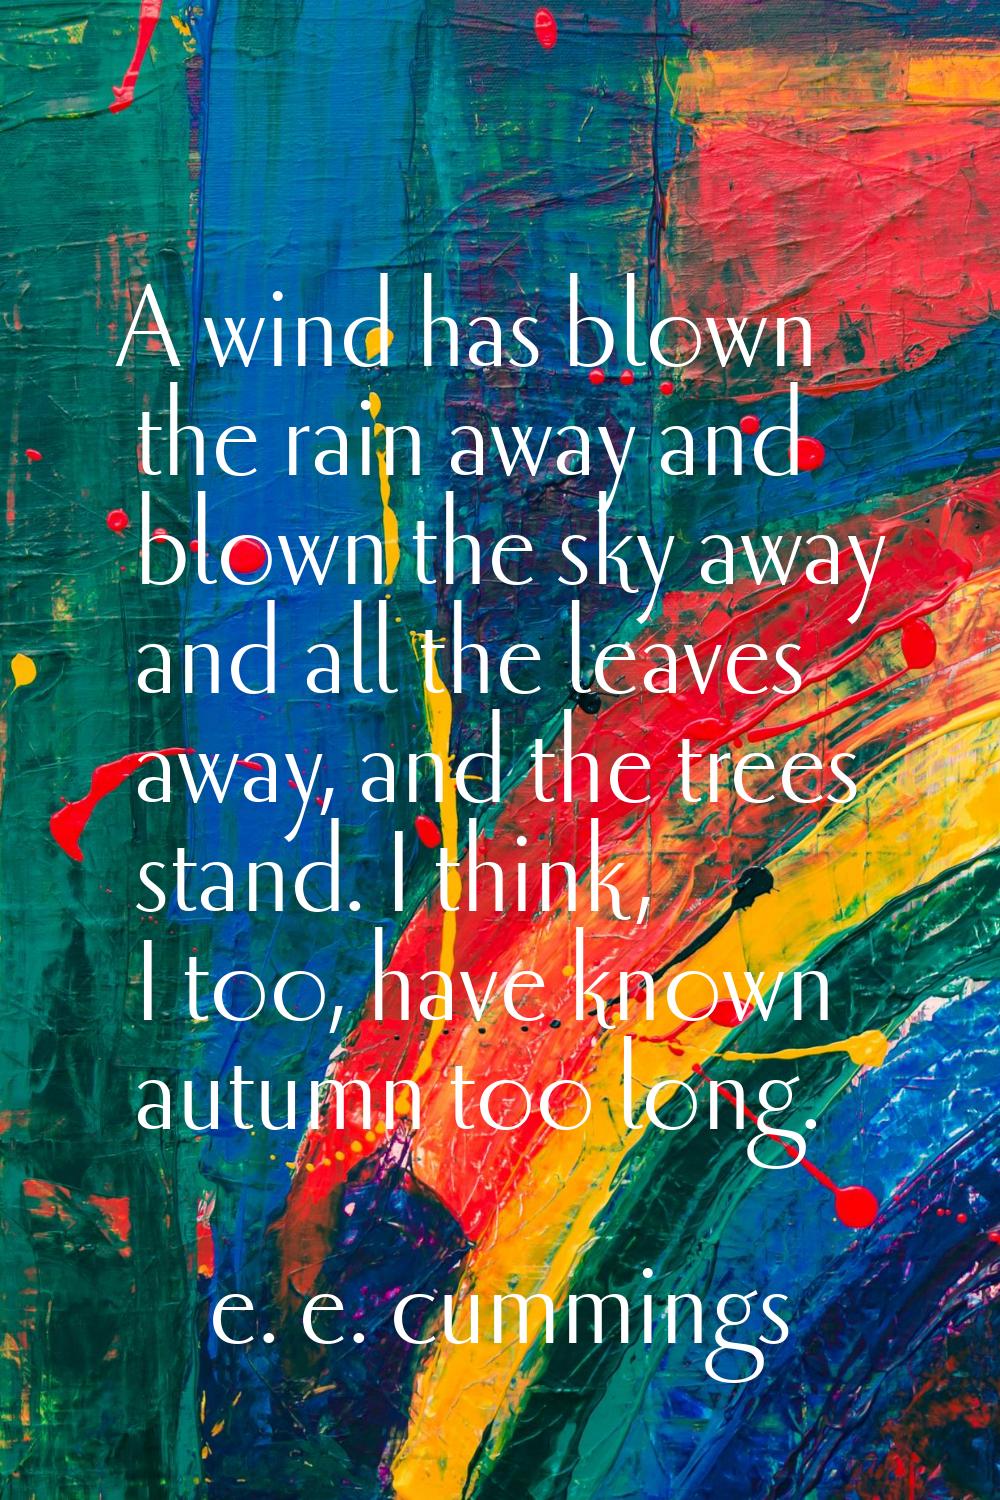 A wind has blown the rain away and blown the sky away and all the leaves away, and the trees stand.